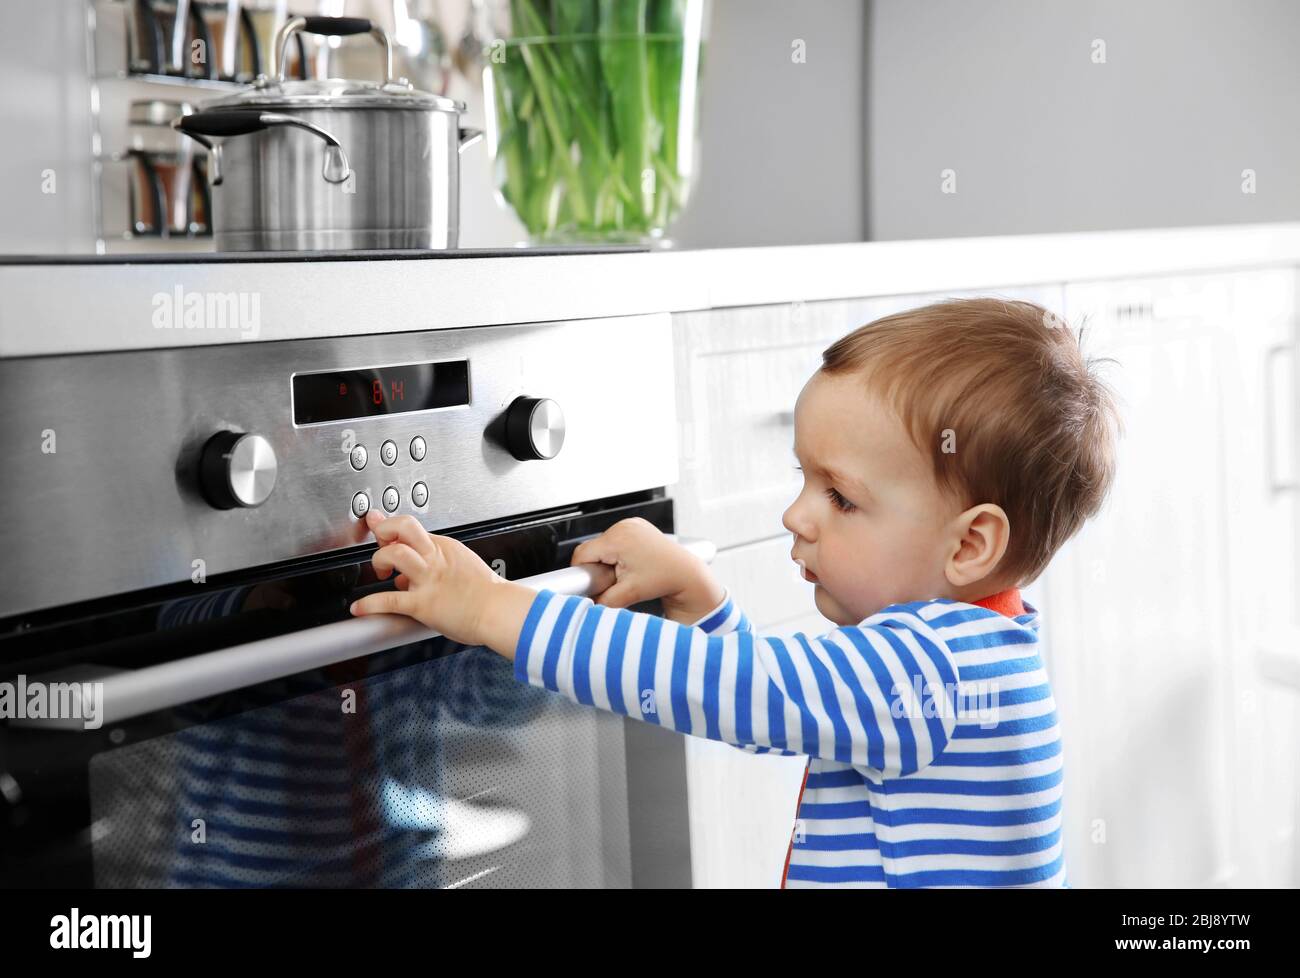 https://c8.alamy.com/comp/2BJ8YTW/little-child-playing-with-electric-stove-in-the-kitchen-2BJ8YTW.jpg